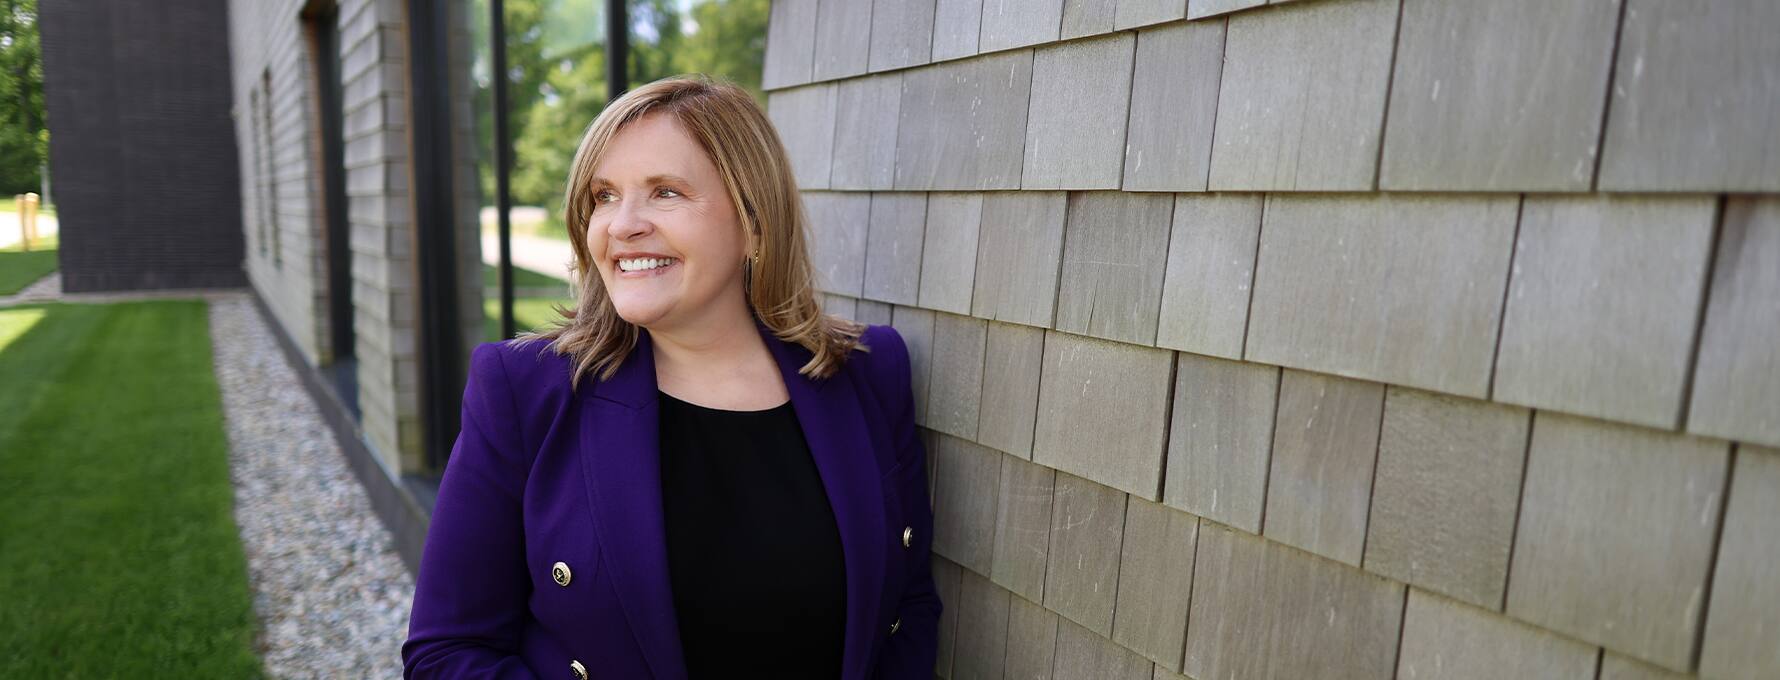 Lisa Marsh Ryerson, president of SNHU, leaning against a wall on campus and wearing a purple blazer